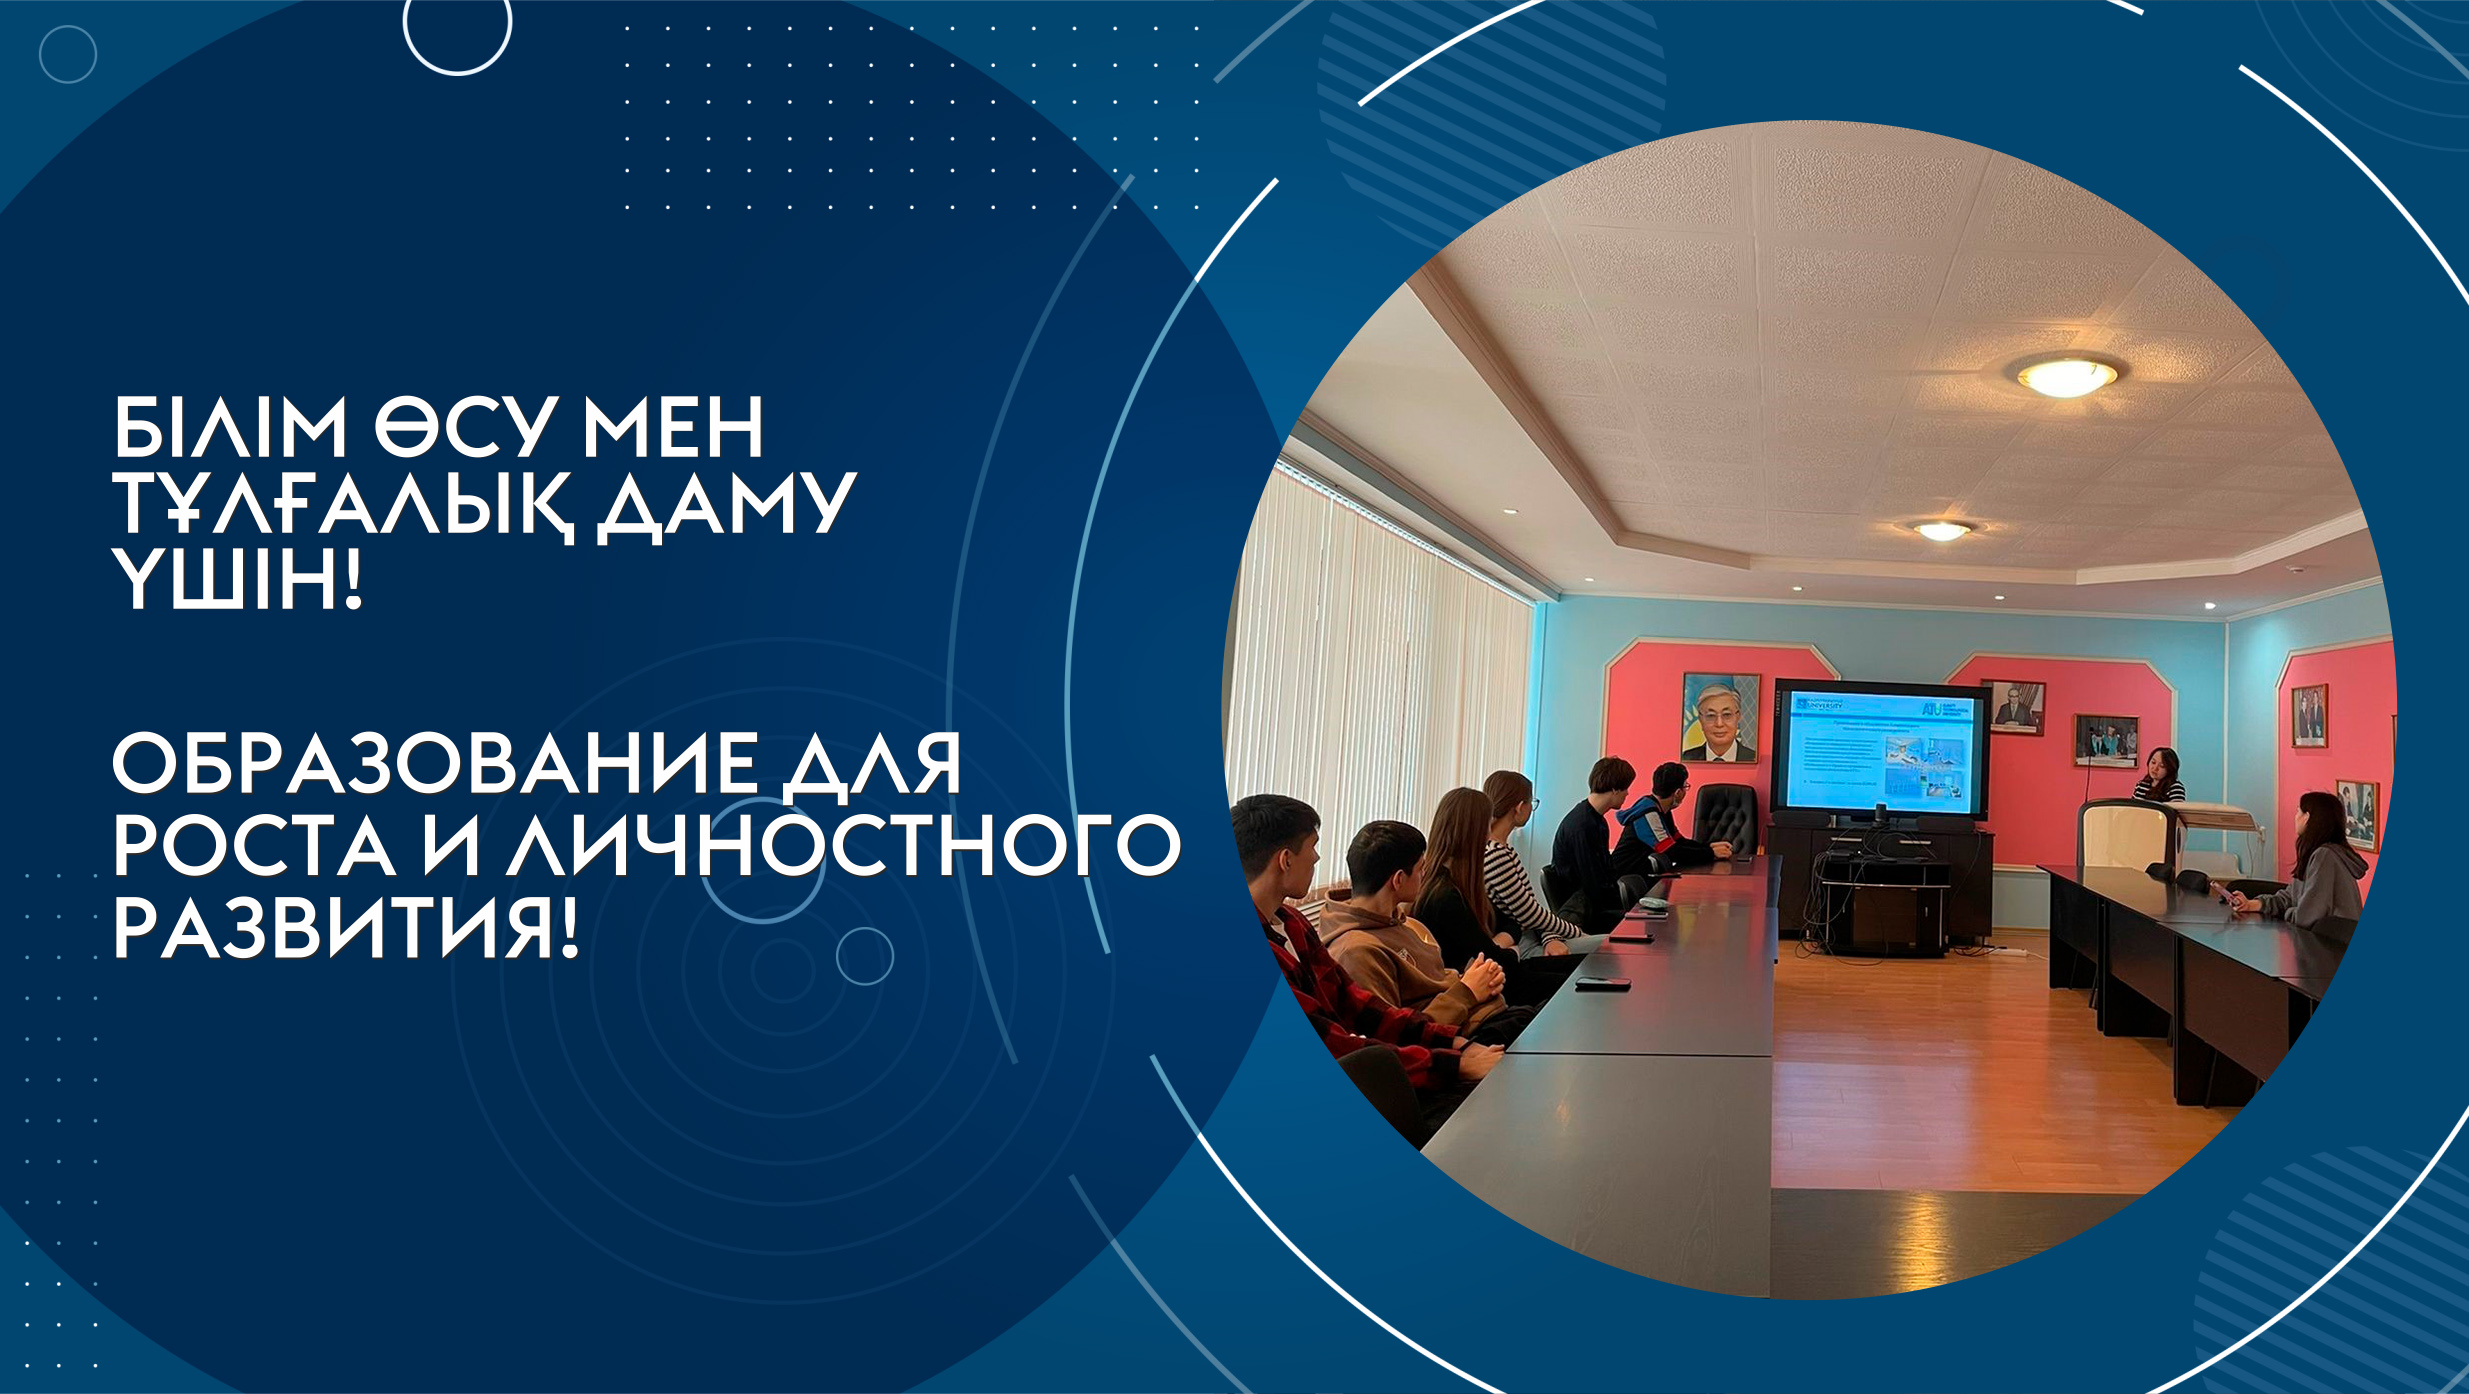 Information day “Academic mobility: Study opportunities abroad and in Kazakhstan”